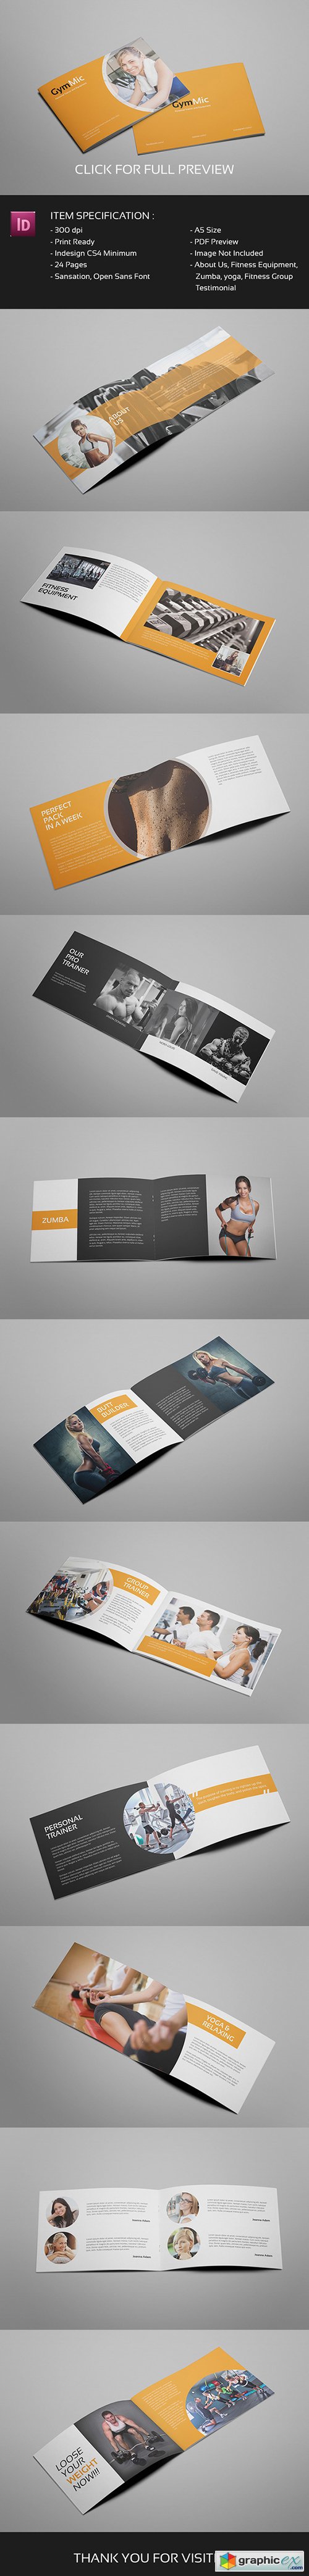  Gymmic - A5 Fitness and Gym Brochure